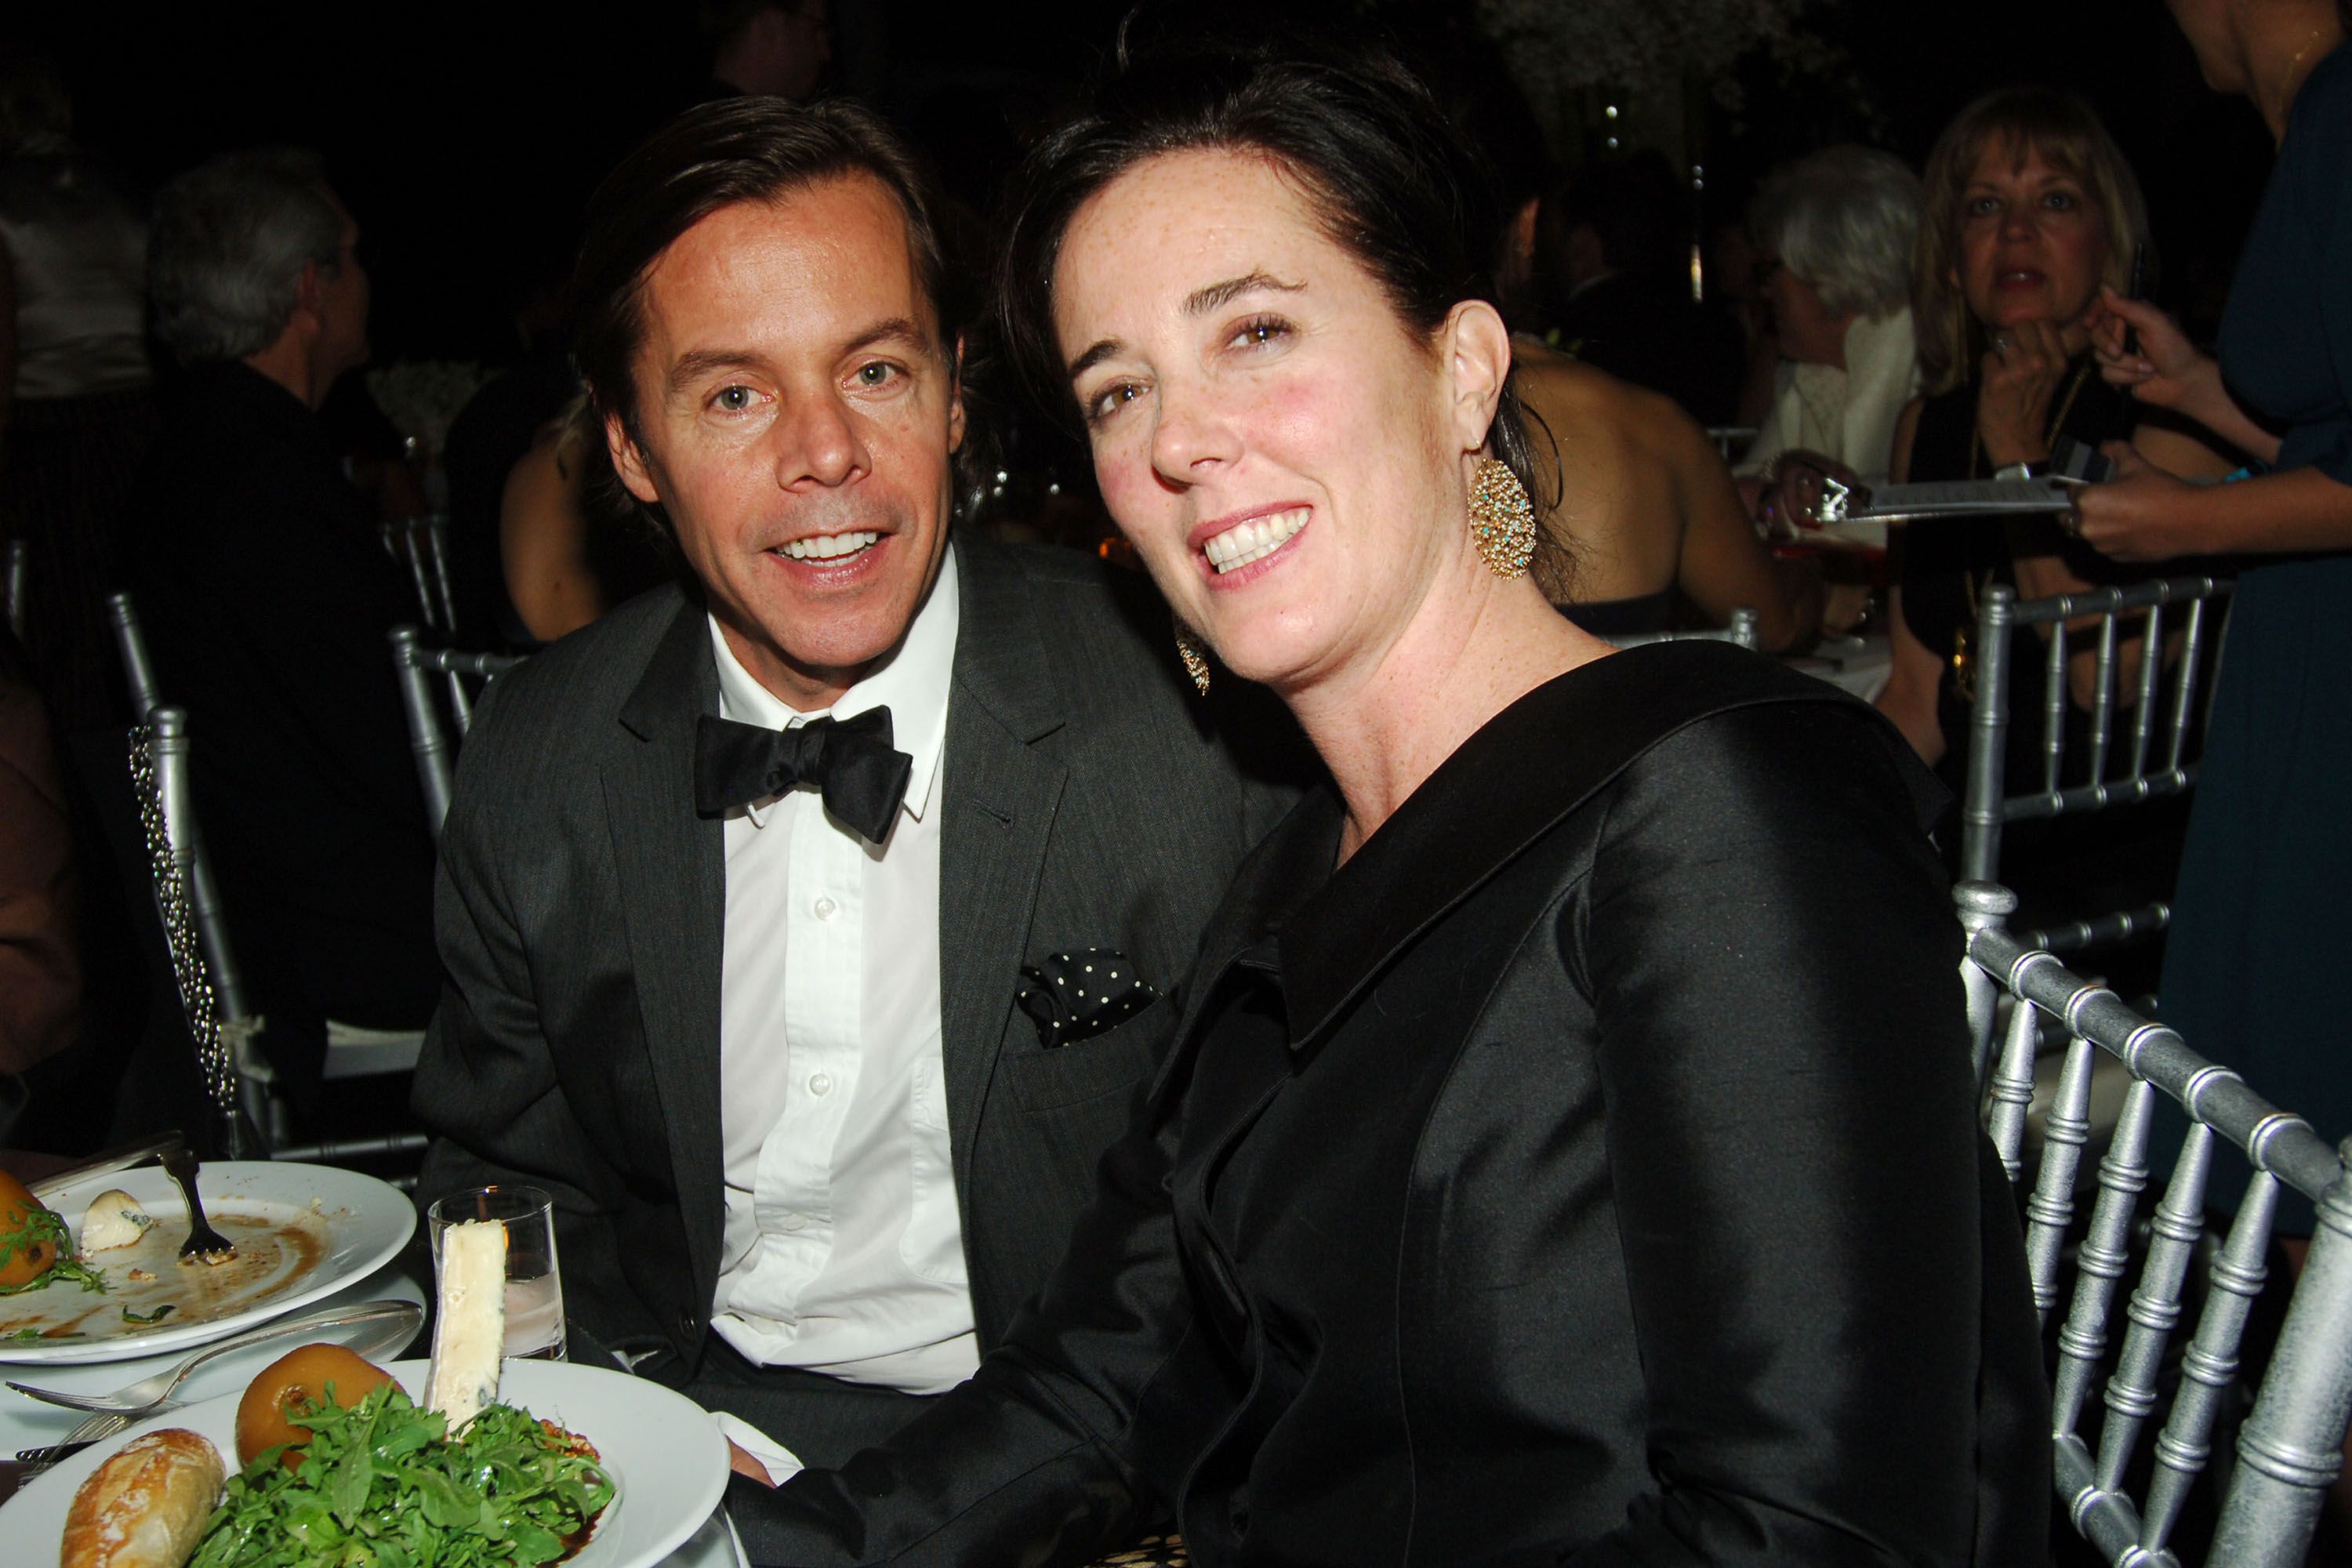 Andy Spade Releases Statement About Kate Spade's Death